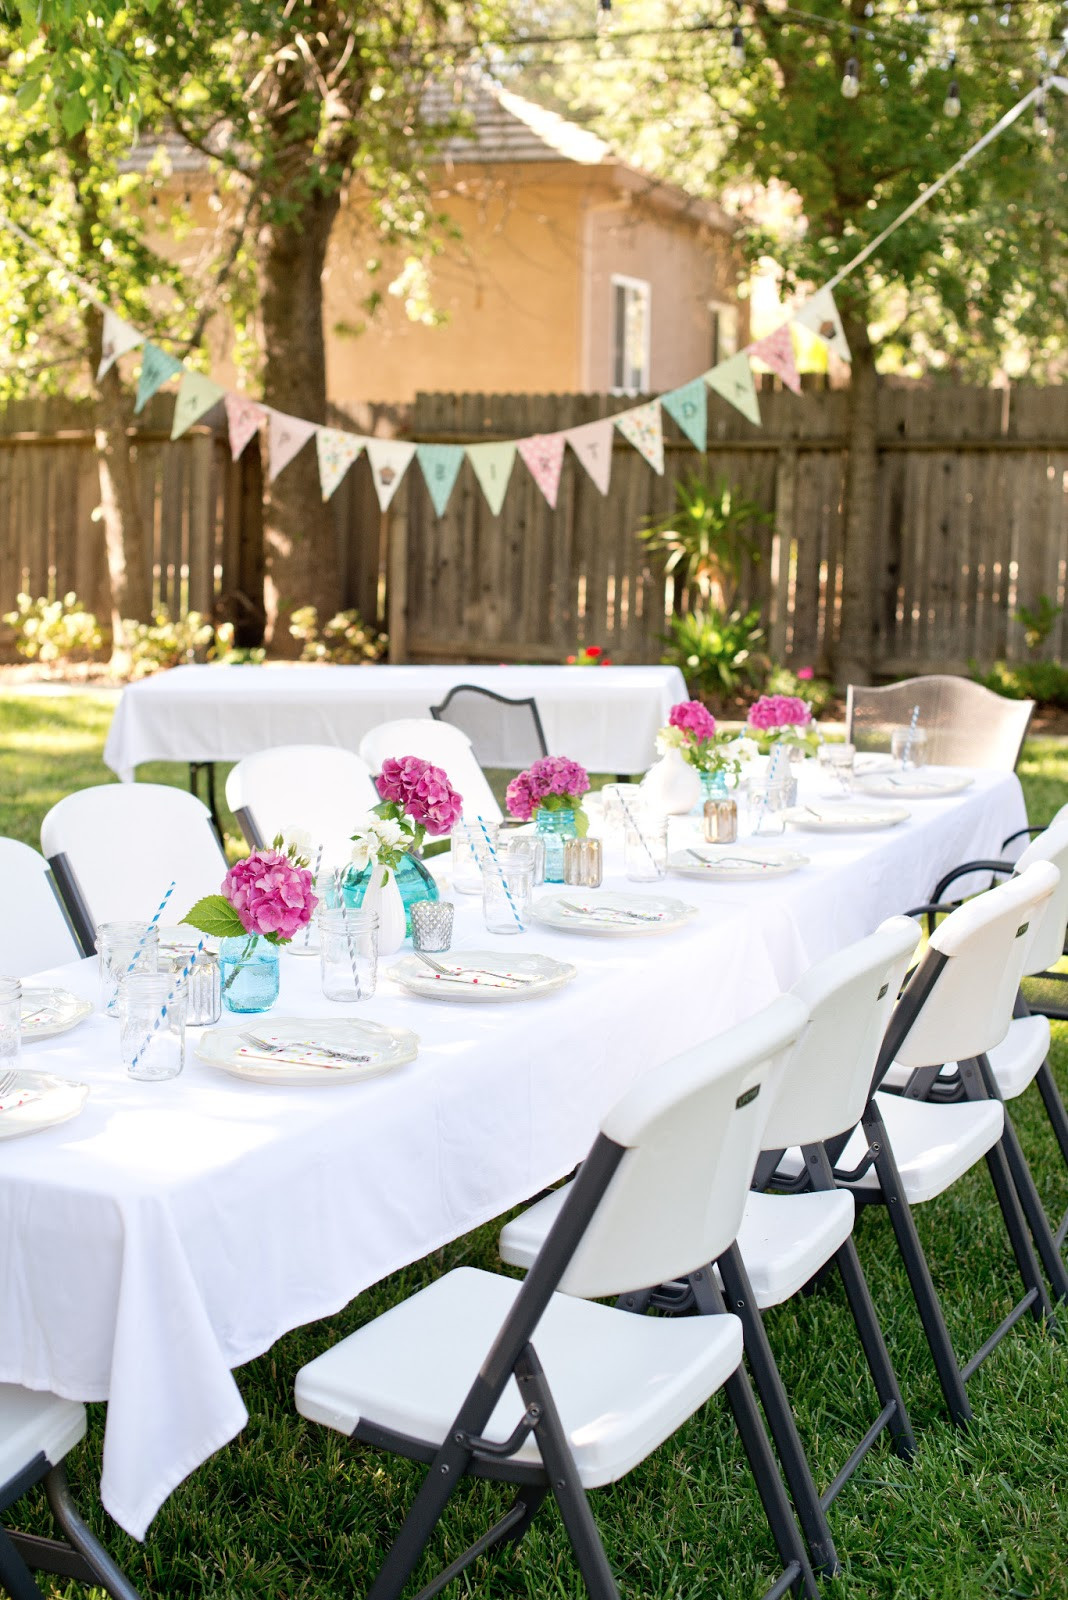 Backyard Party Ideas On Pinterest
 Backyard Party Decorations For Unfor table Moments